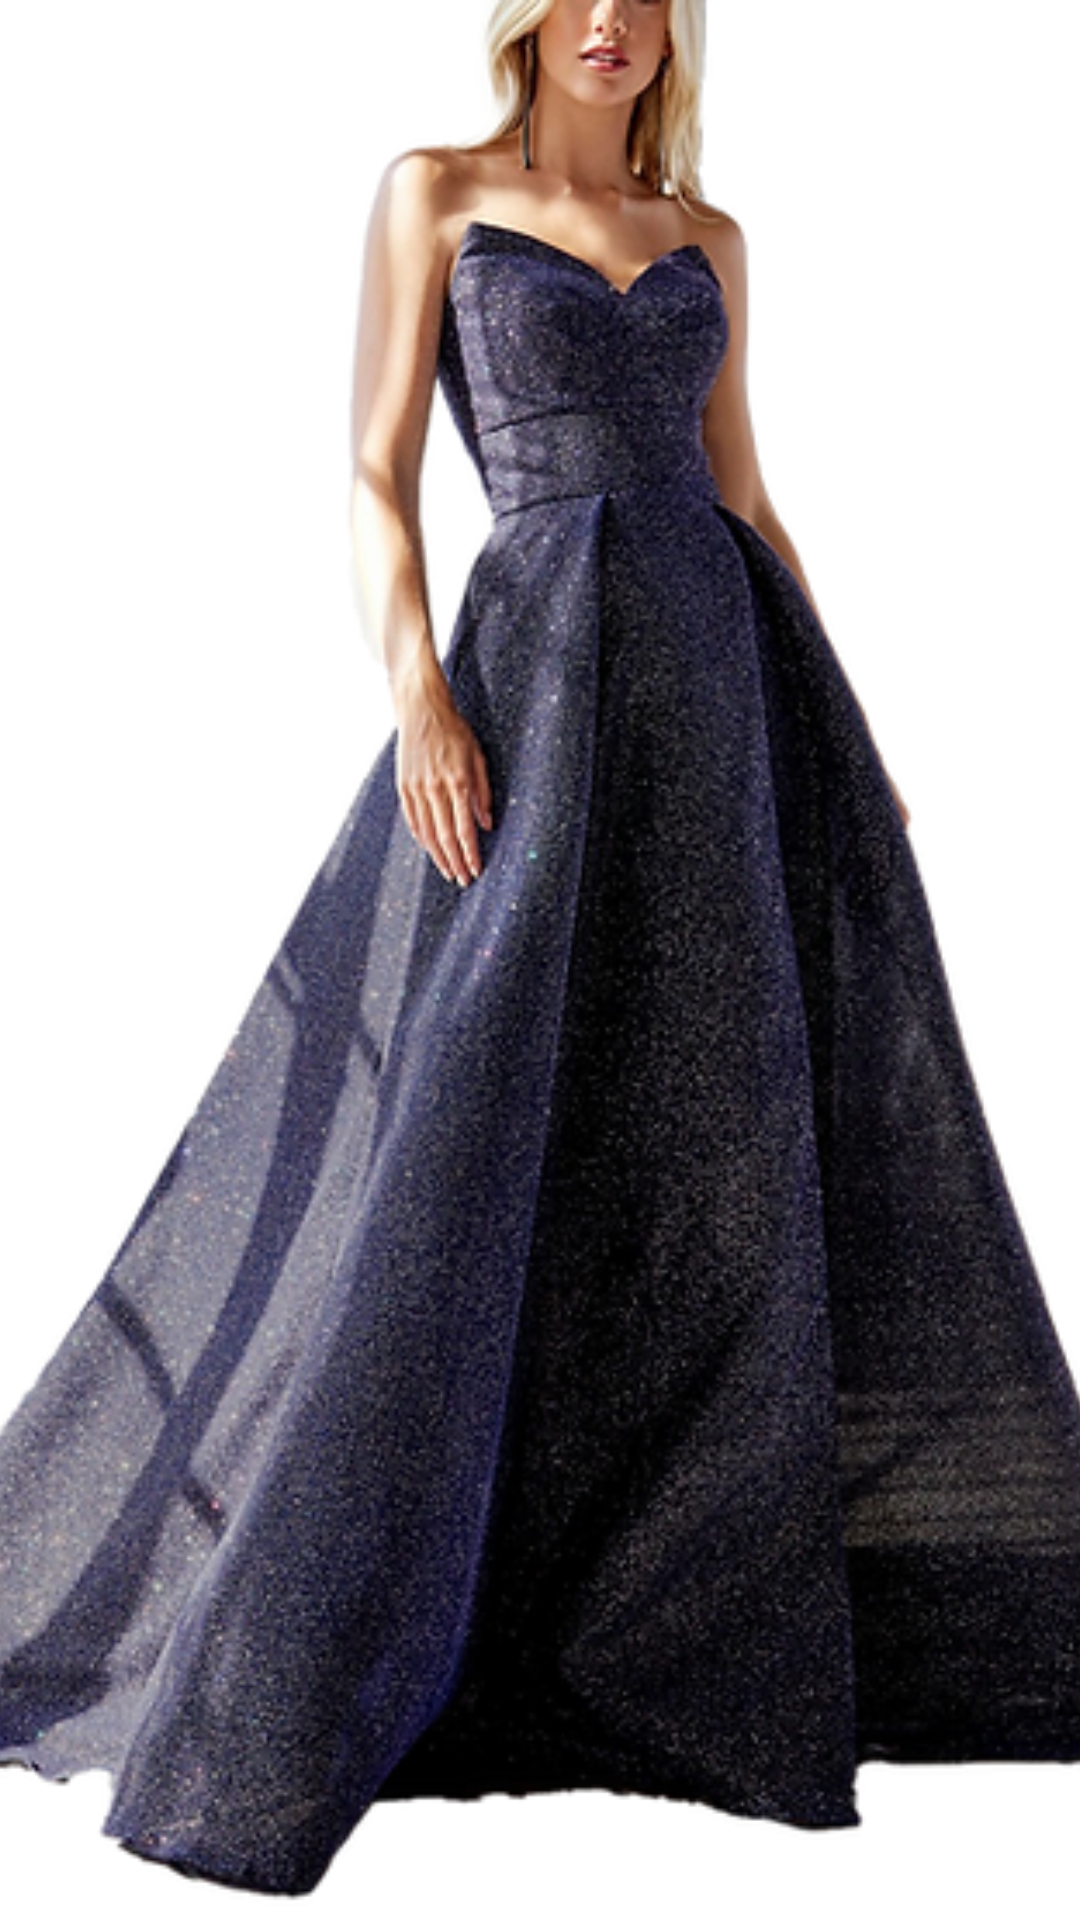 Ladivine Twilight Glitter Ball Gown in Royal Blue